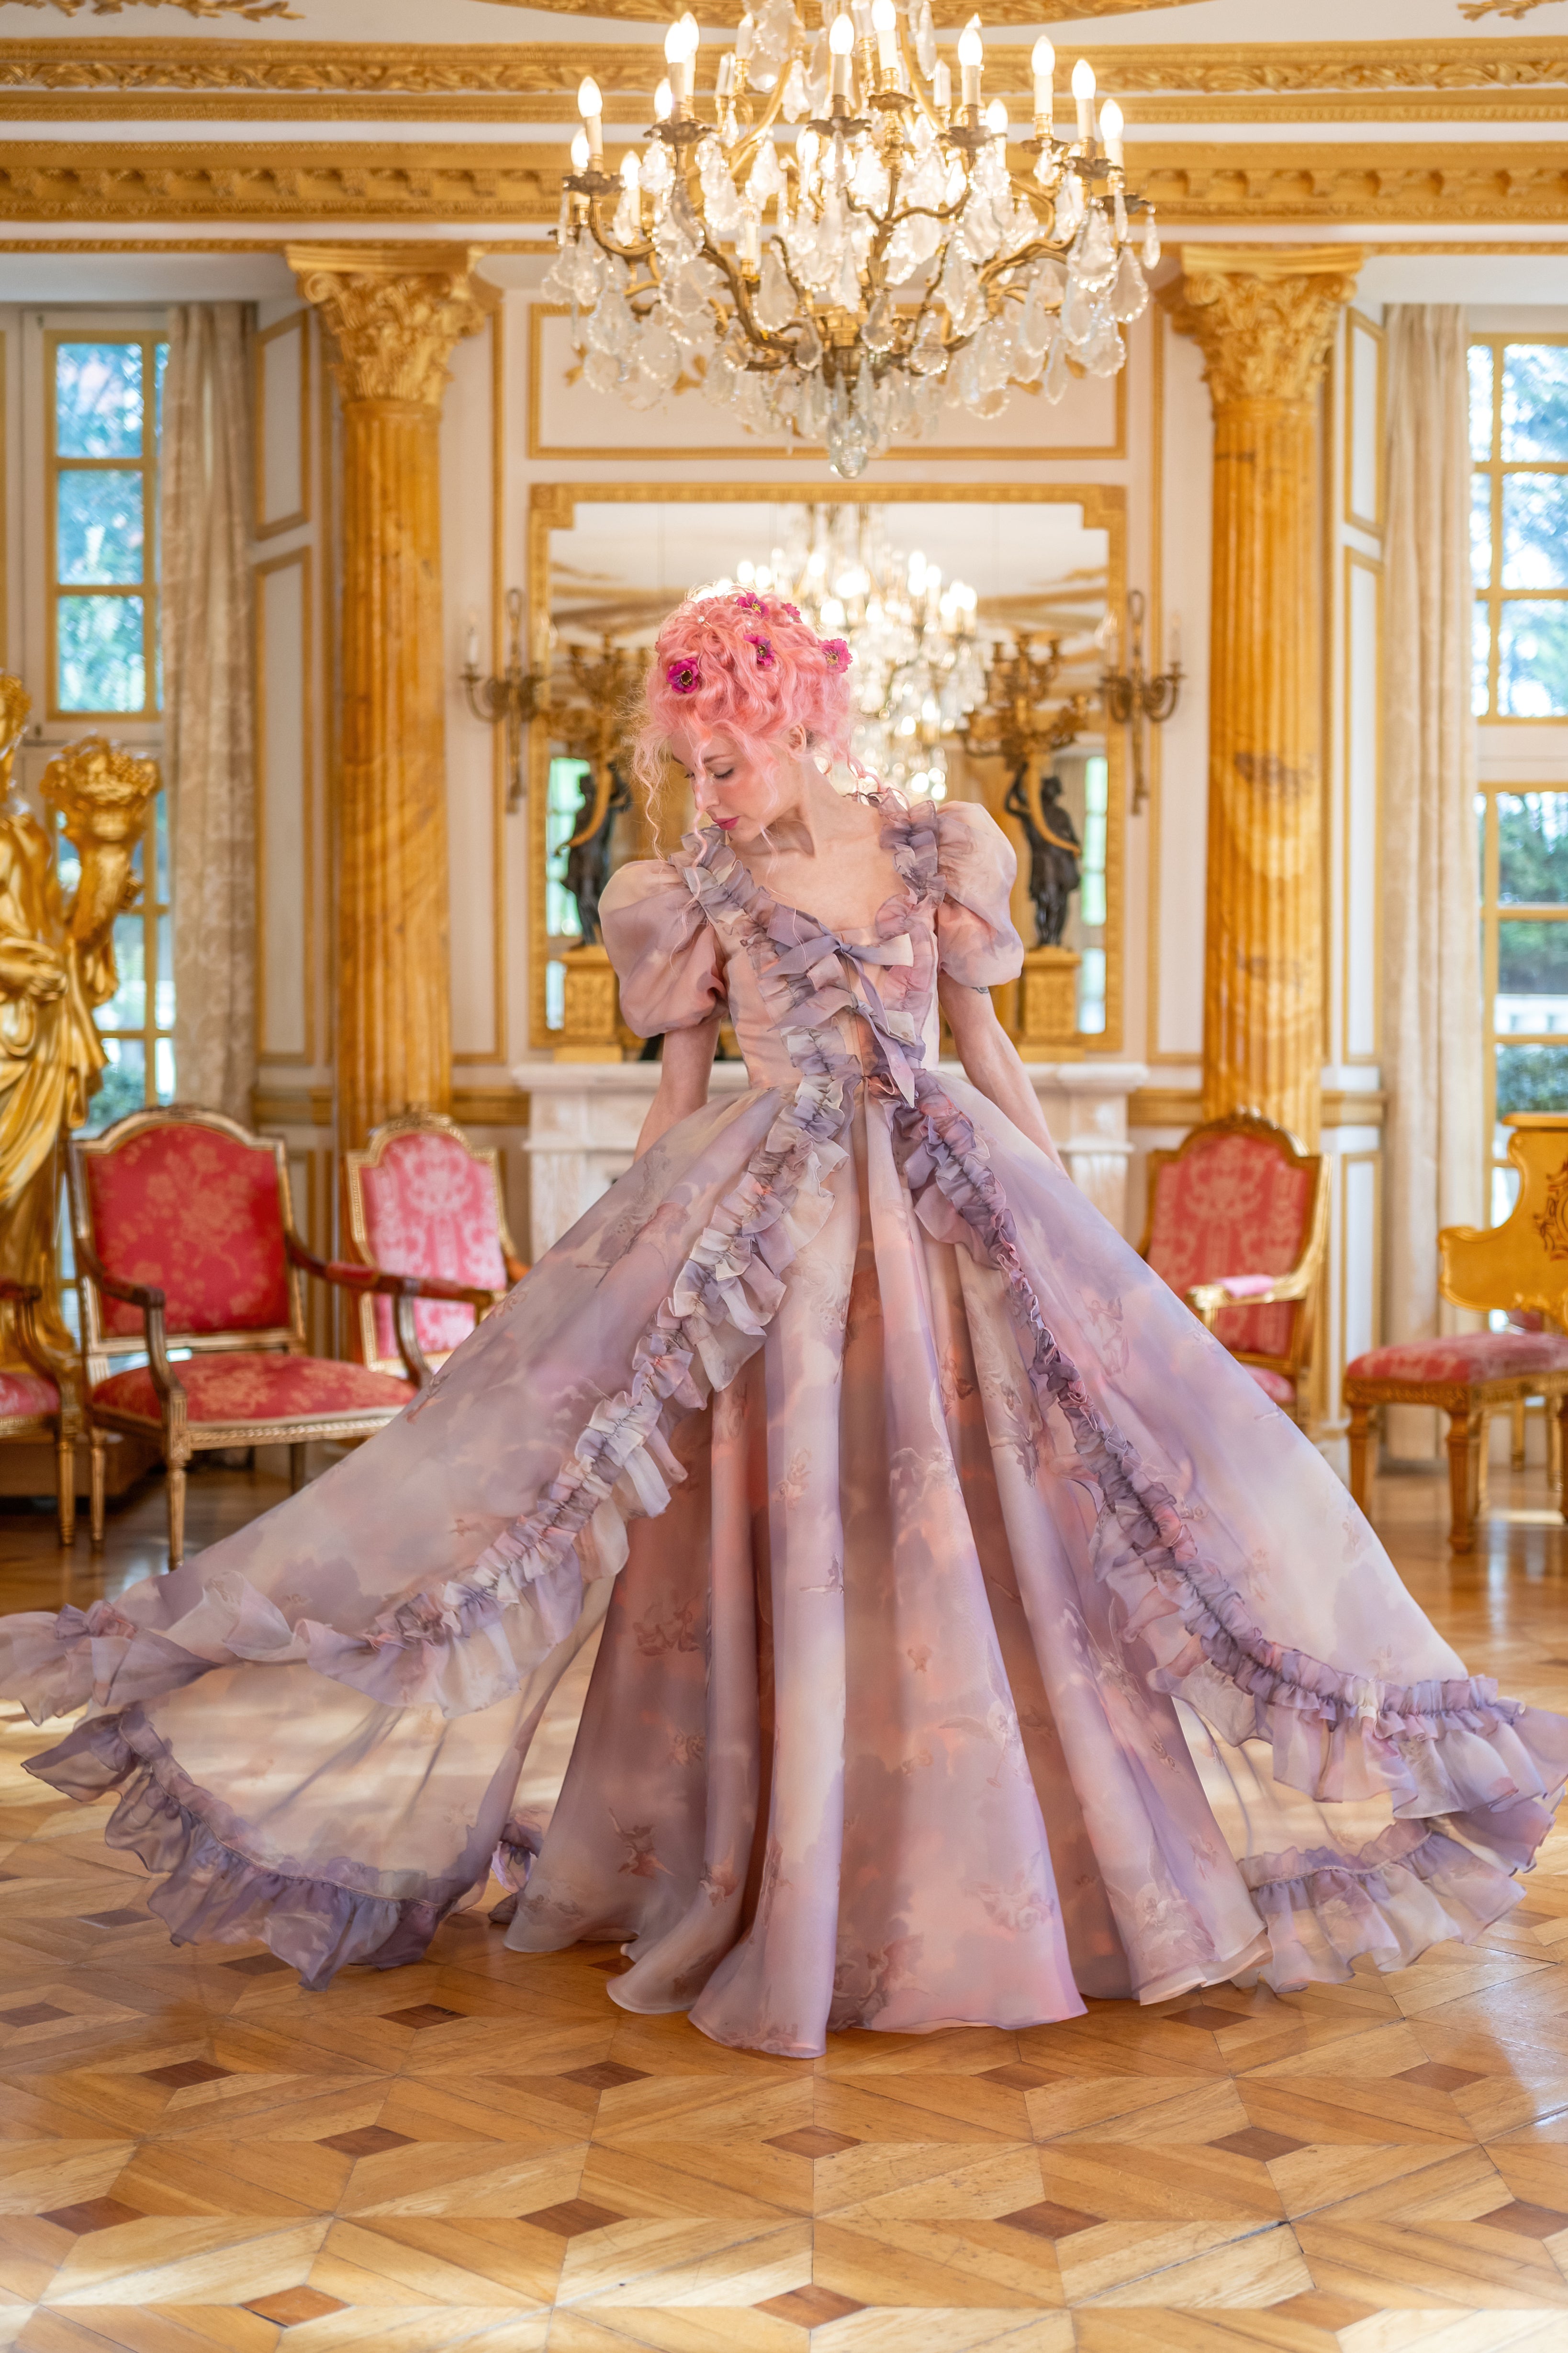 Twilight Gown. | Fantasy gowns, Fantasy dress, Masquerade dresses